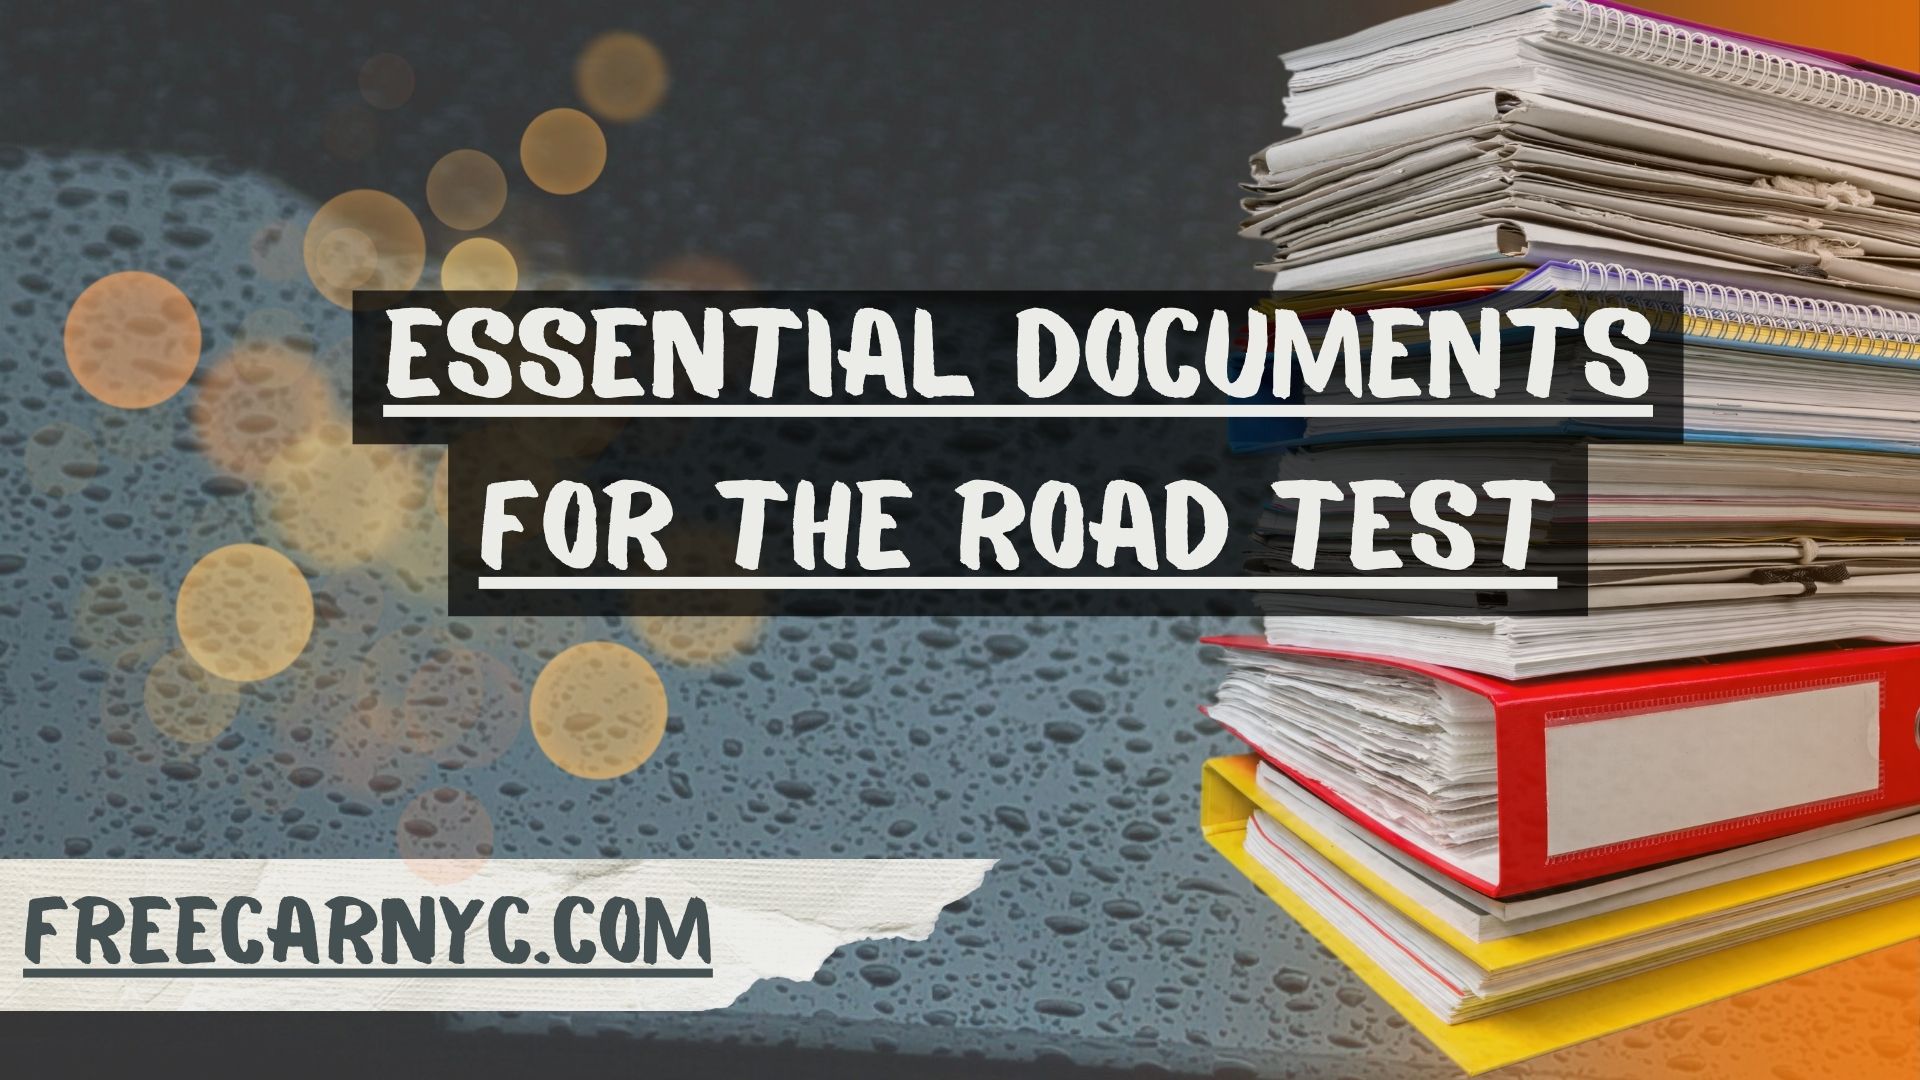 Essential Documents for the Road Test